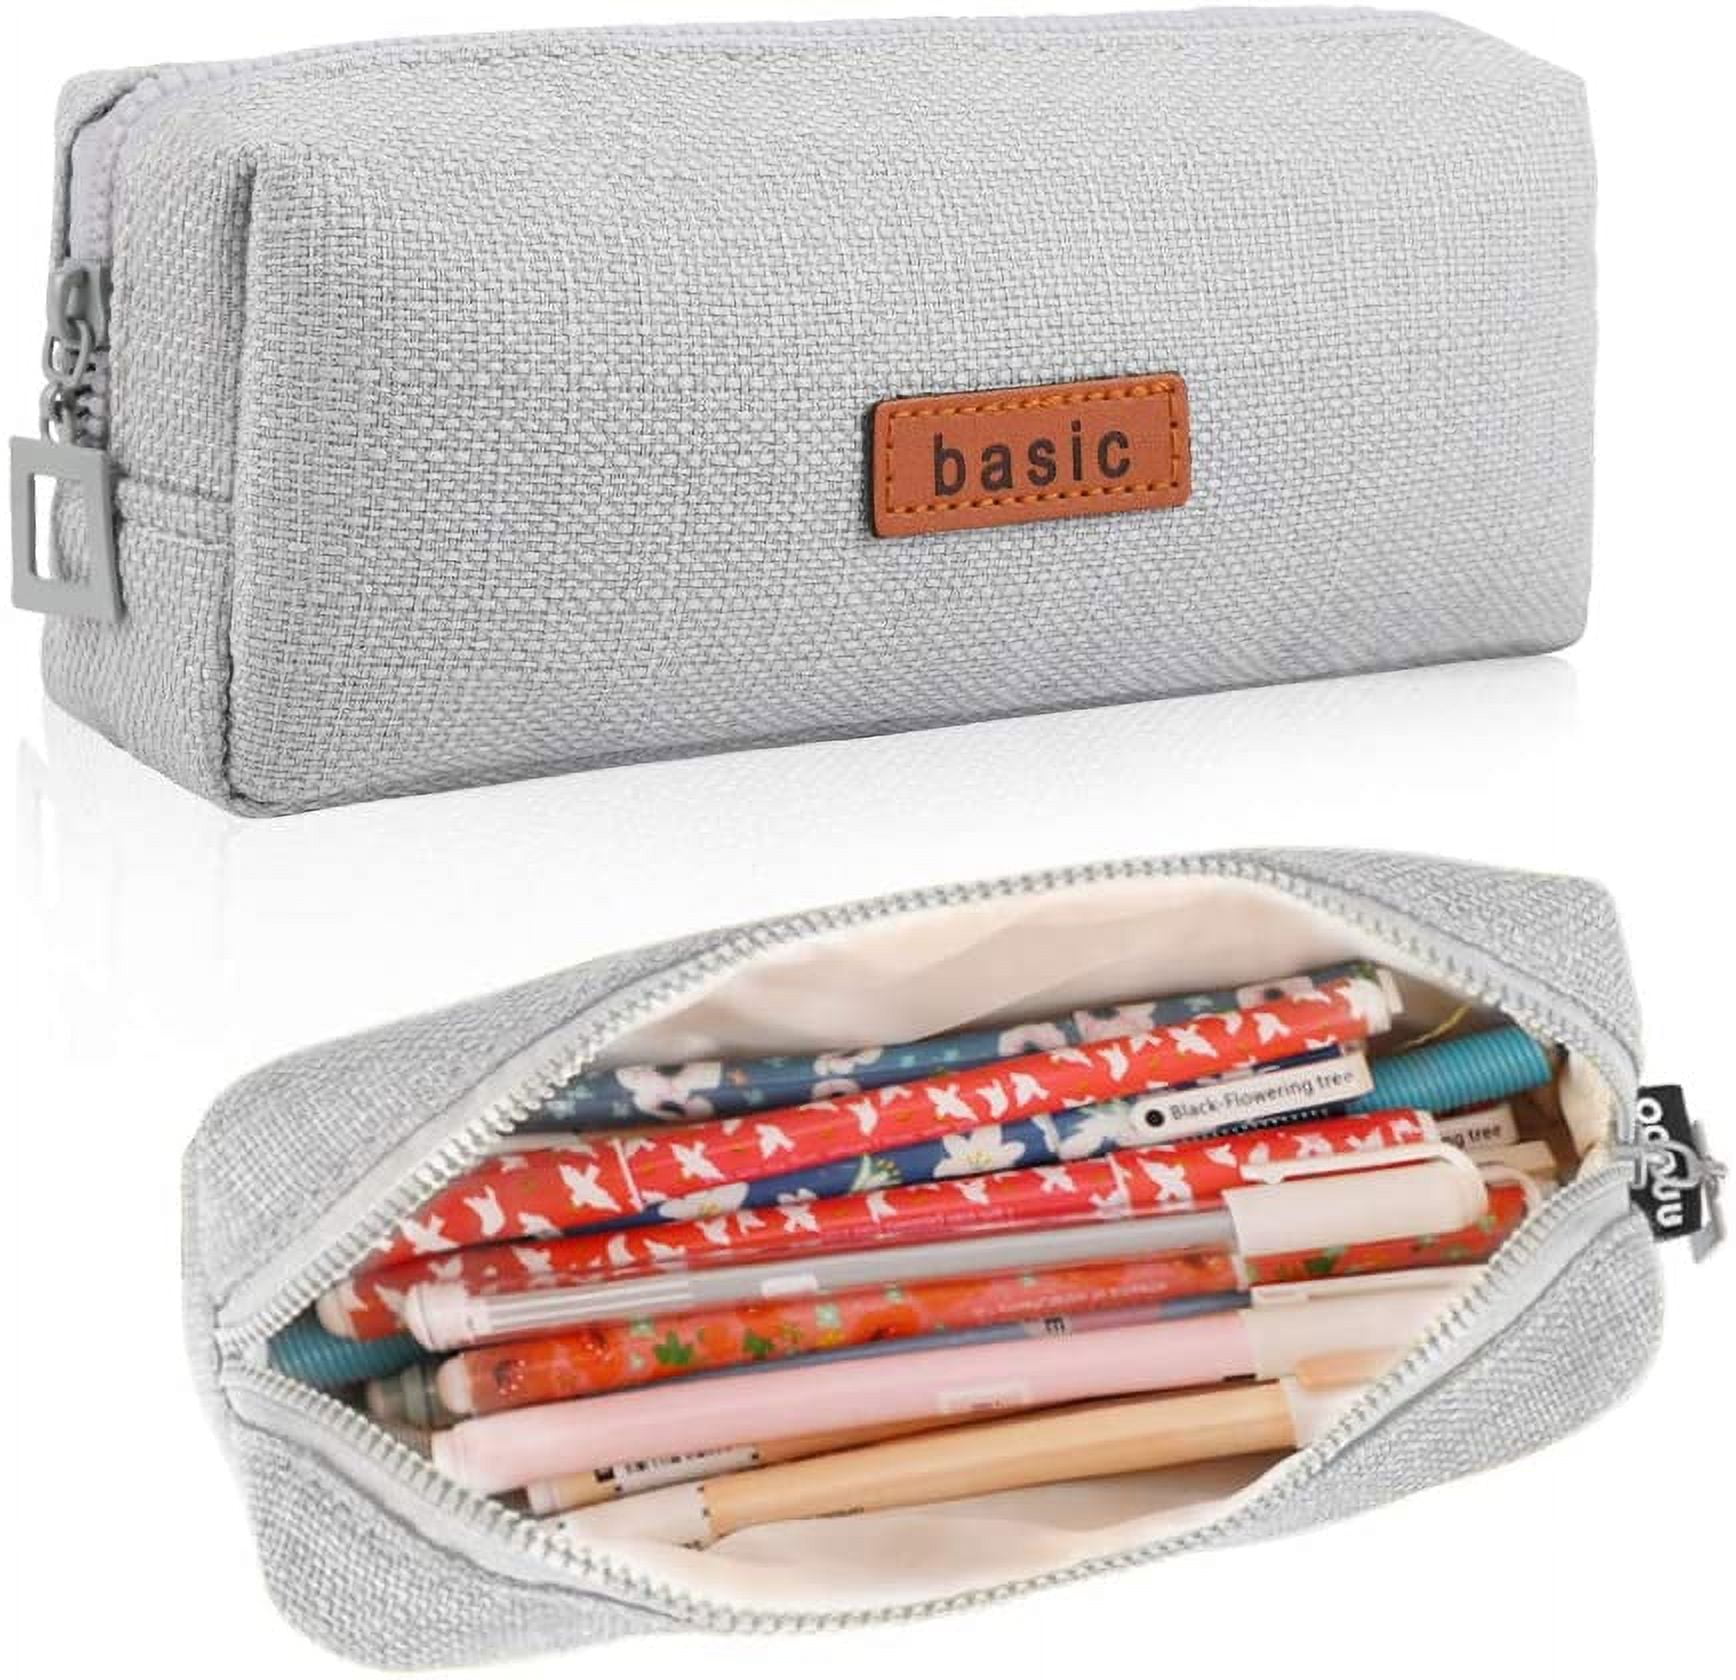 Bkfydls School Supplies Clearance Pencil Case Pencil Pouch Pencil Case Student Pencil Bag Coin Bag Cosmetic Bag Office Stationery Storage Bag Youth